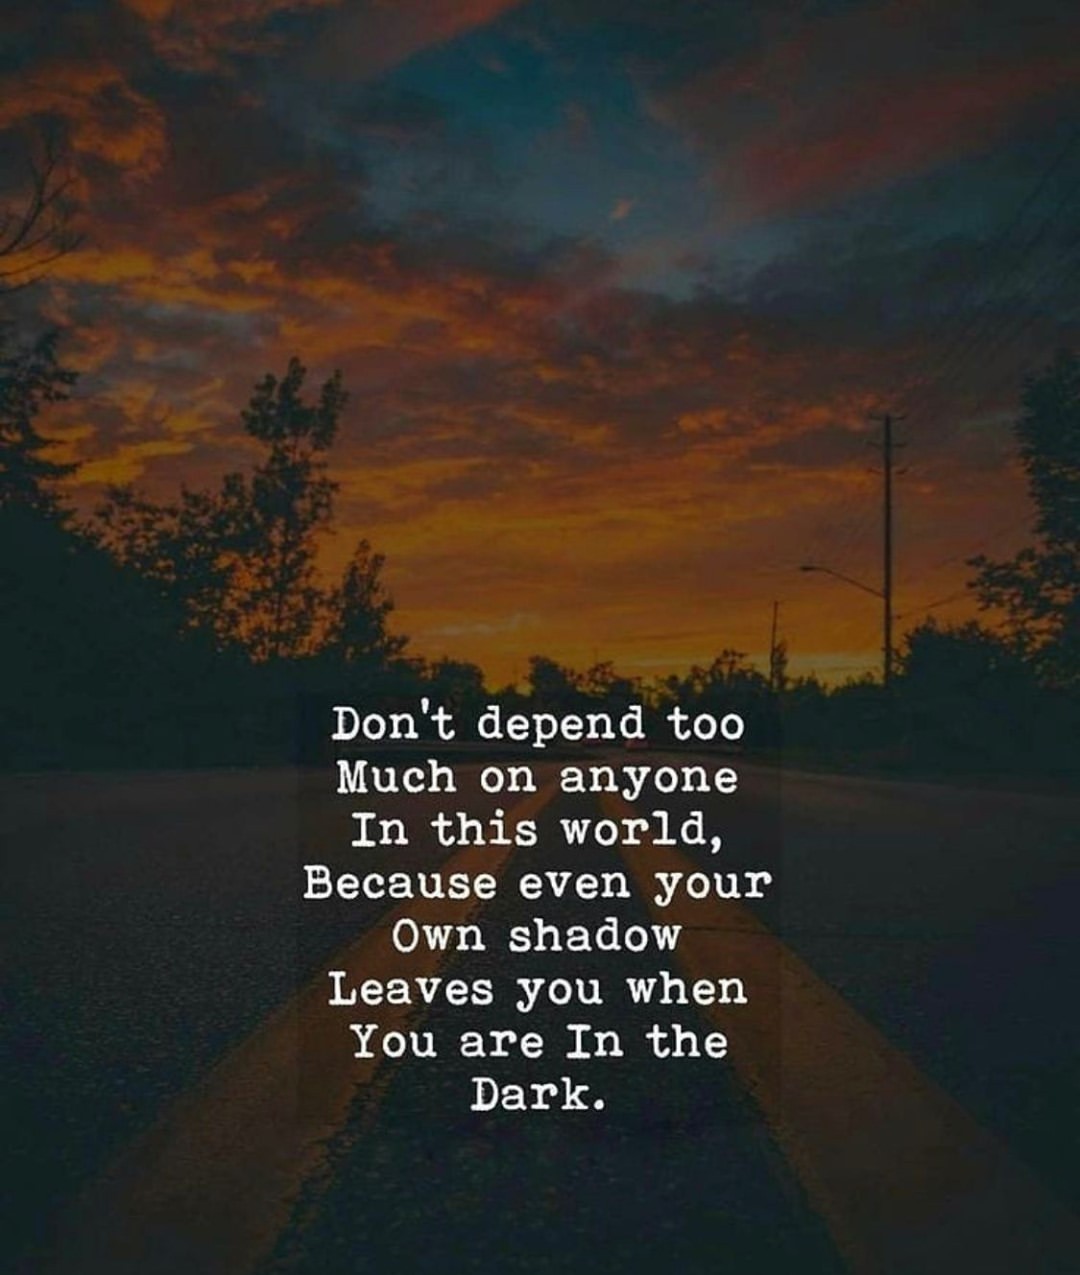 Don't depend too much on anyone in this world, because even your own shadow leaves you when you are in the dark.